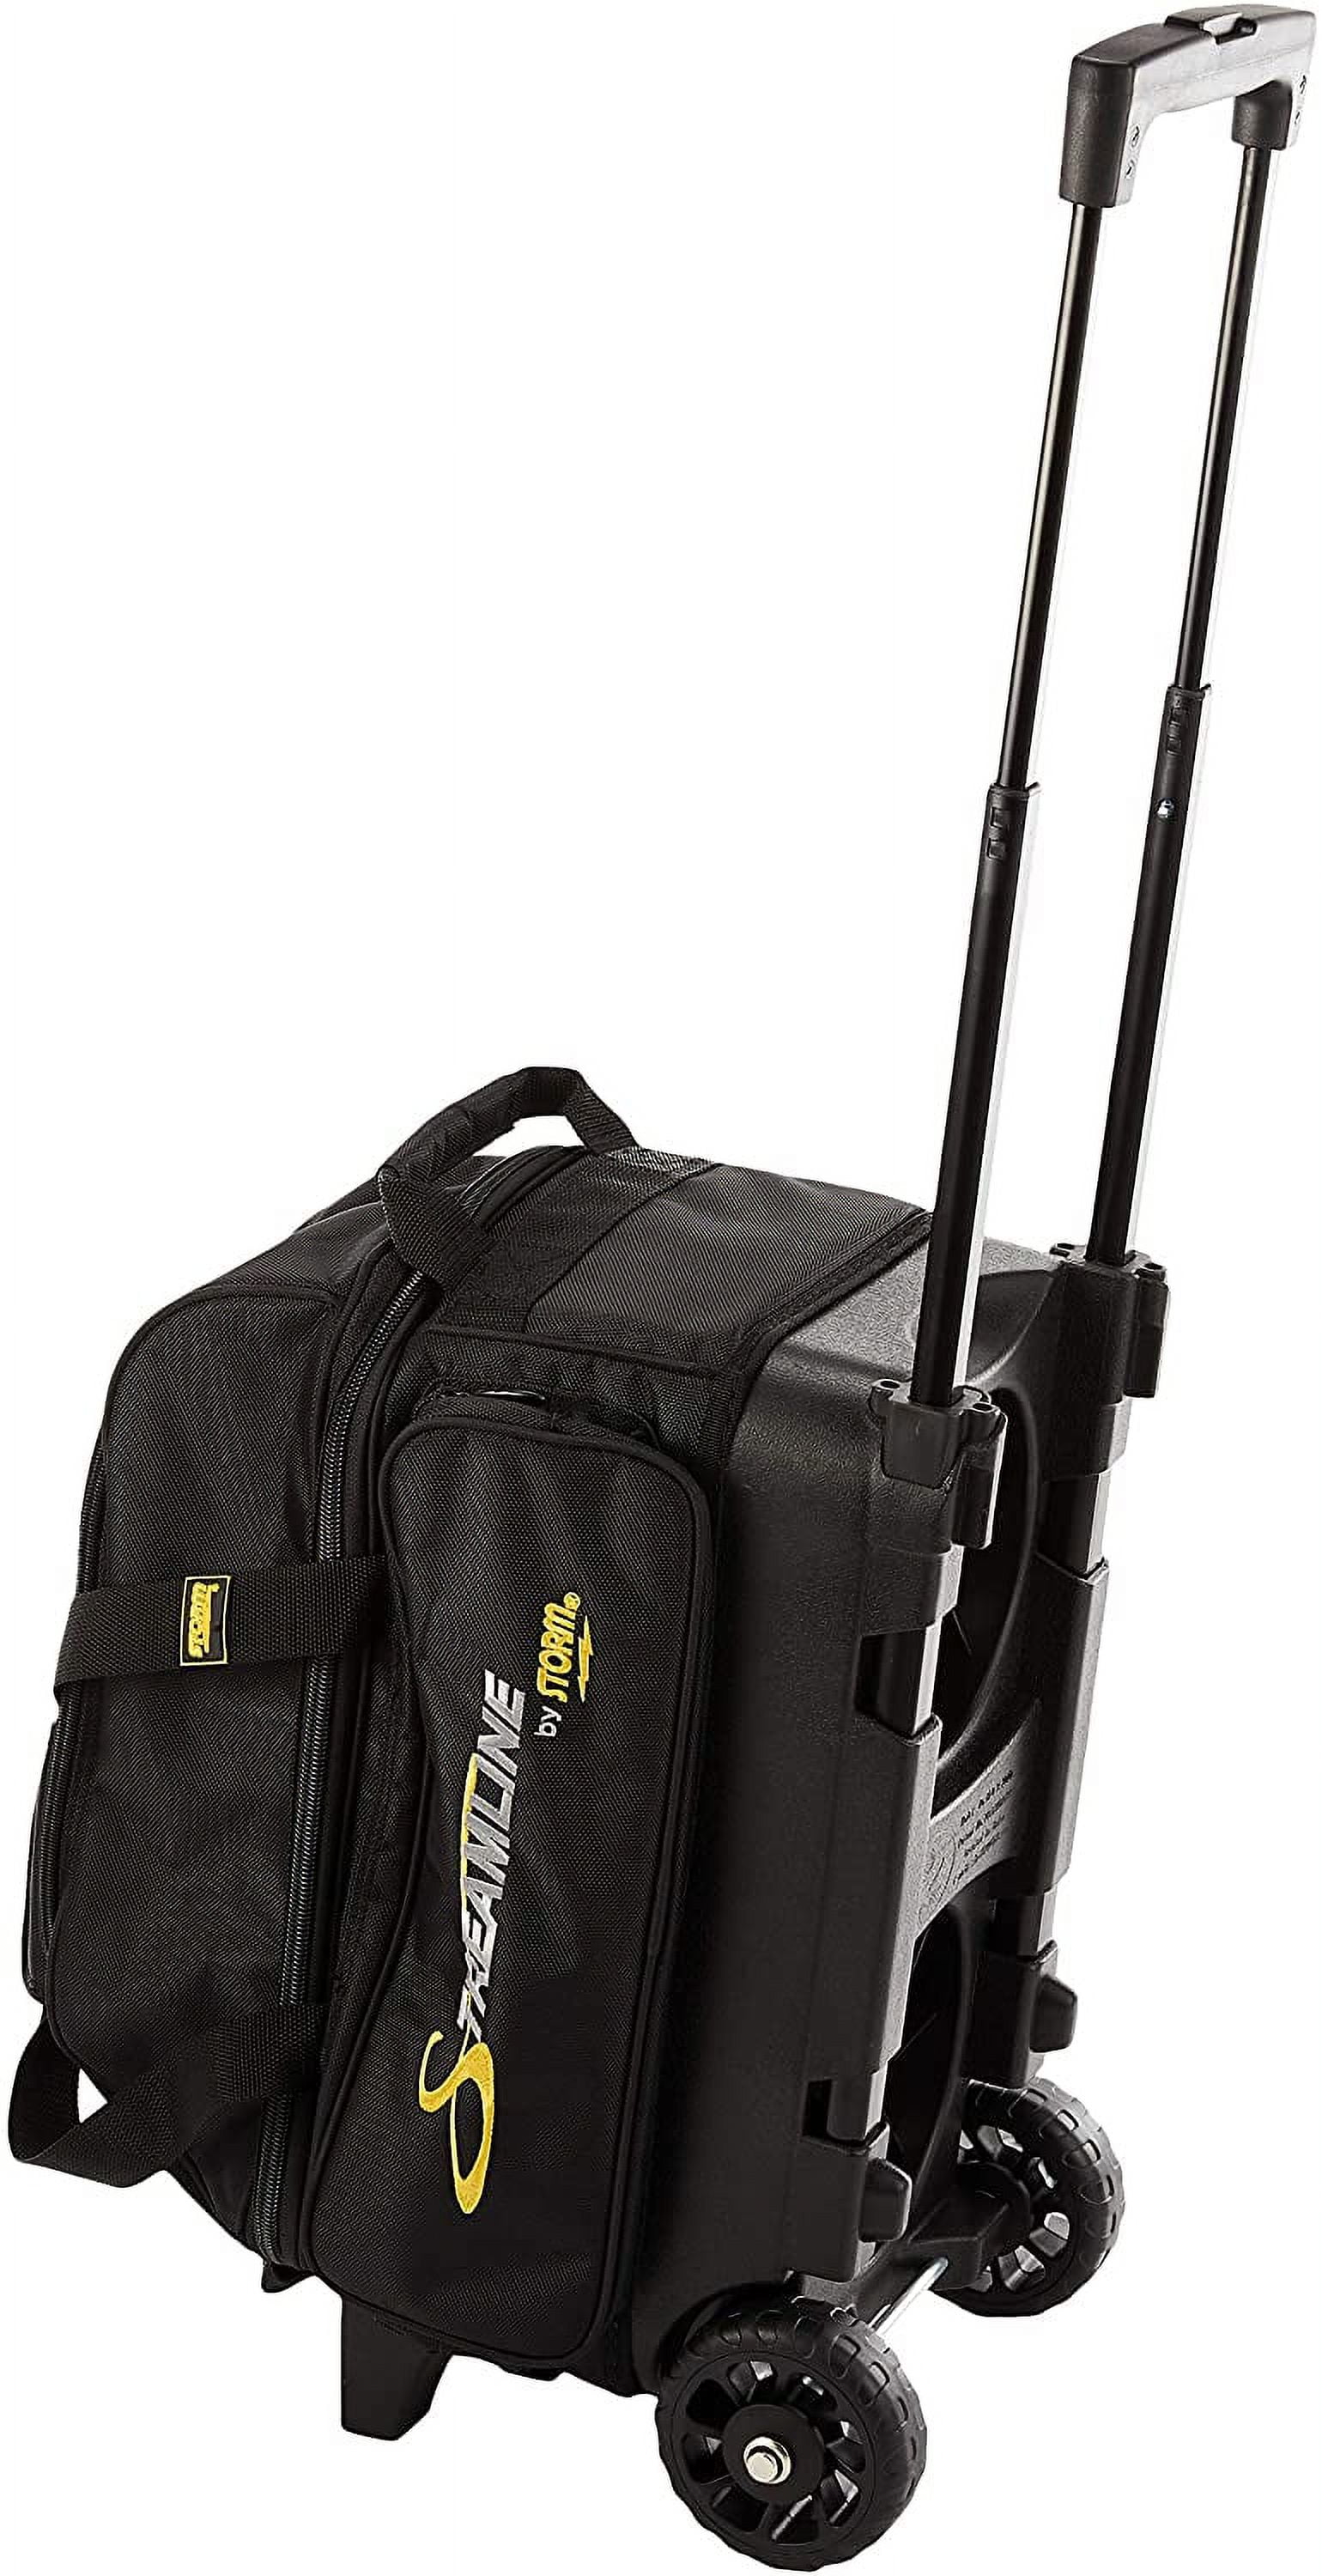 Storm Streamline 2 Ball Roller Grey/Black/Yellow Bowling Bags FREE SHIPPING